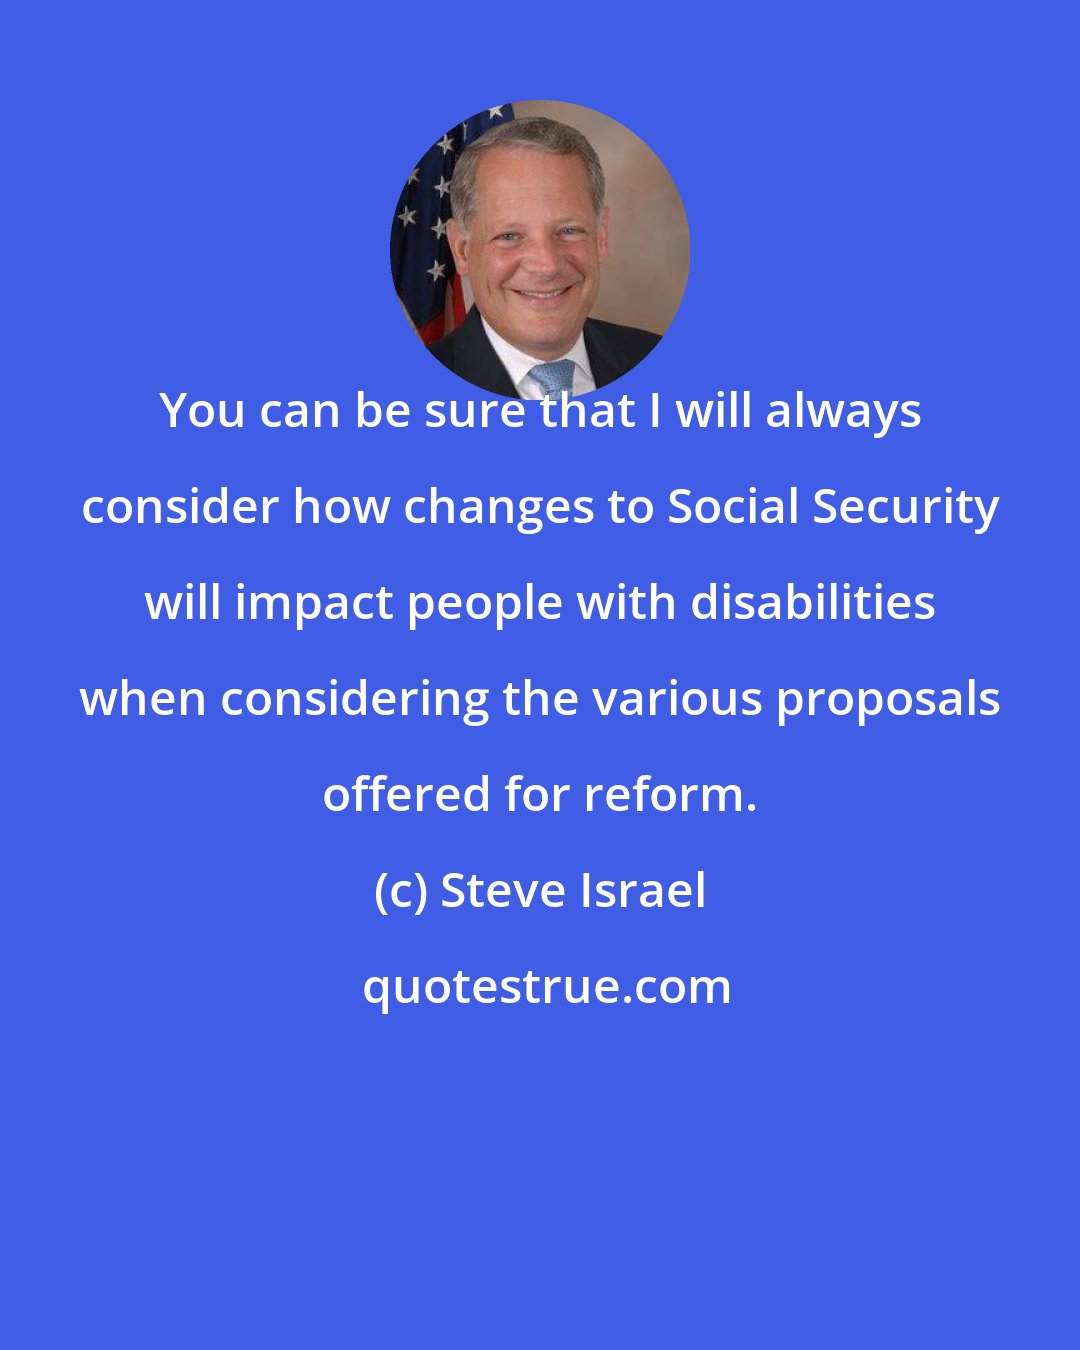 Steve Israel: You can be sure that I will always consider how changes to Social Security will impact people with disabilities when considering the various proposals offered for reform.